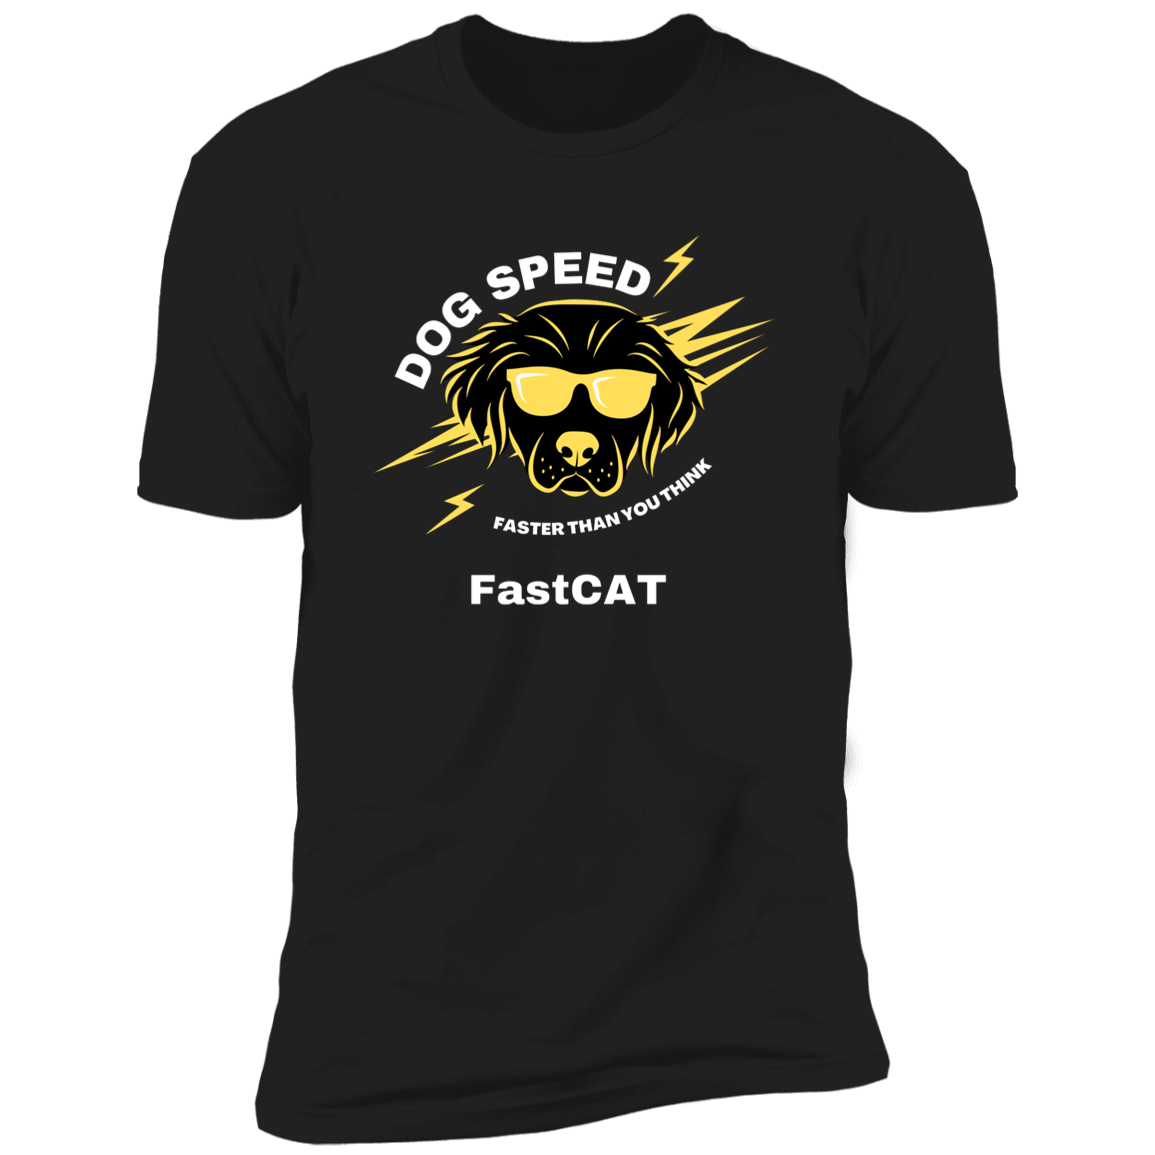 Dog Speed Faster Than You Think FastCAT T-shirt, FastCAT shirt dog shirt for humans, in black